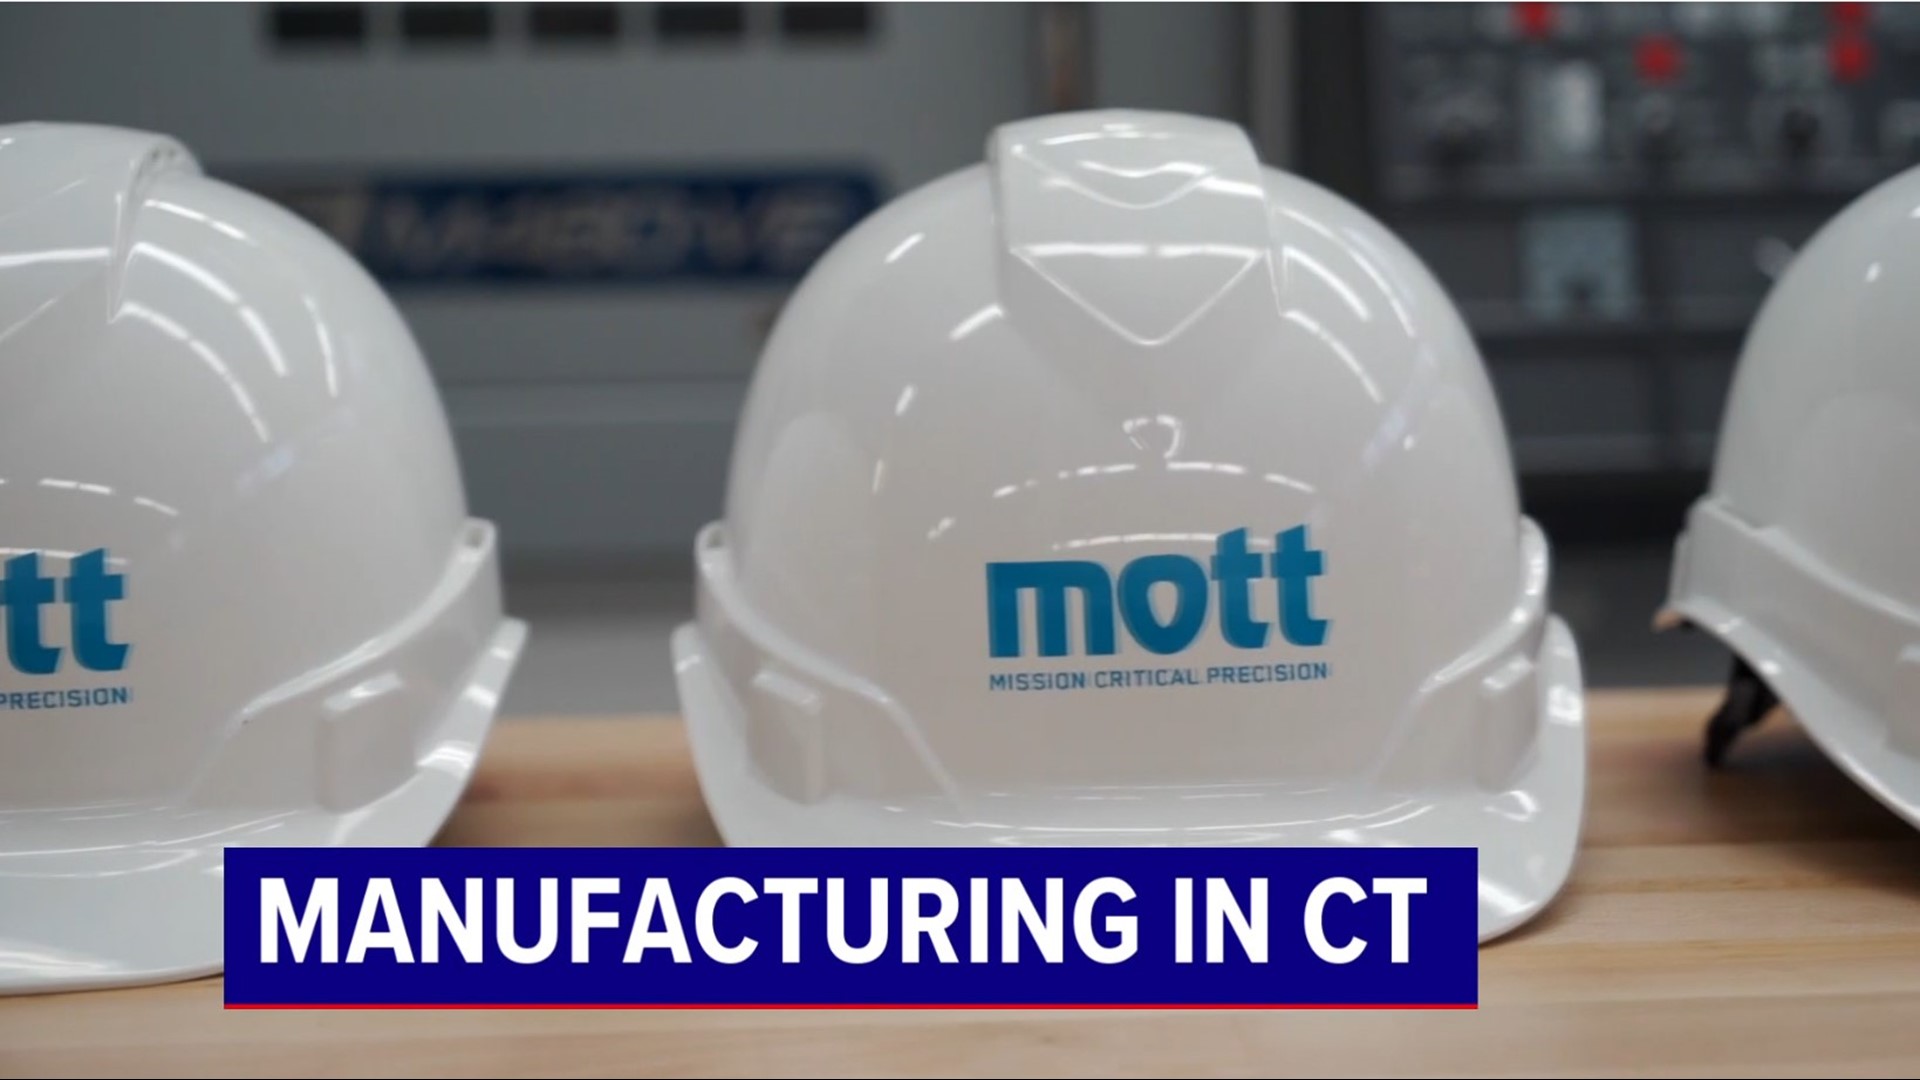 Boris Levin of Mott Industries talks about the state of manufacturing in Connecticut